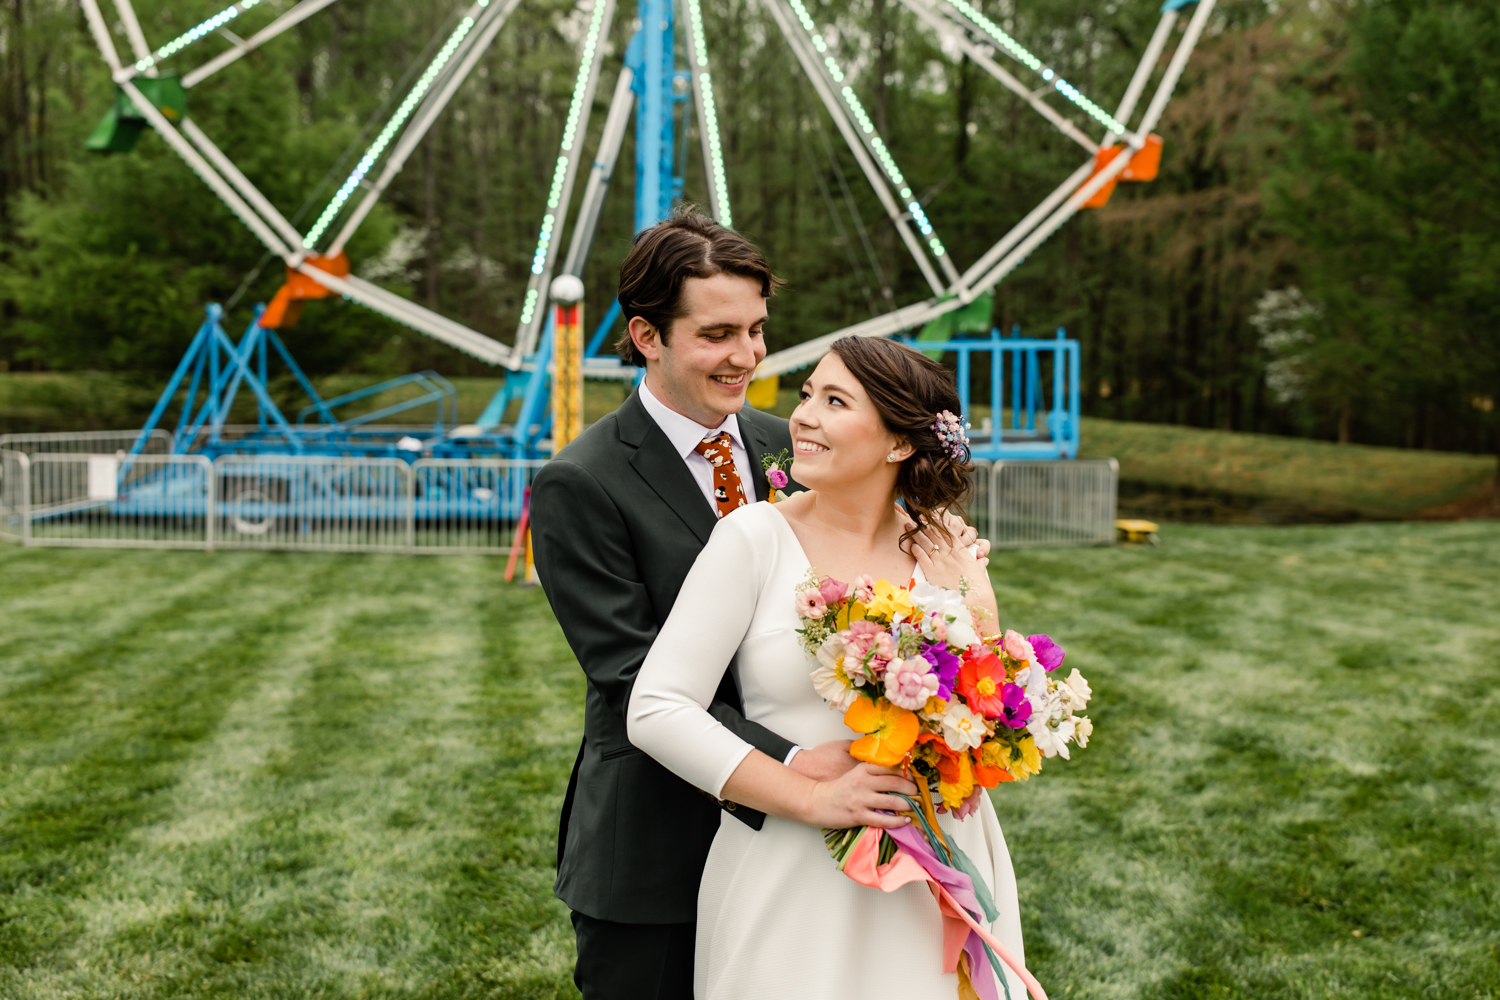 Groom, in a green suit, hugging his bride, in a white dress, in front of a blue ferris wheel.